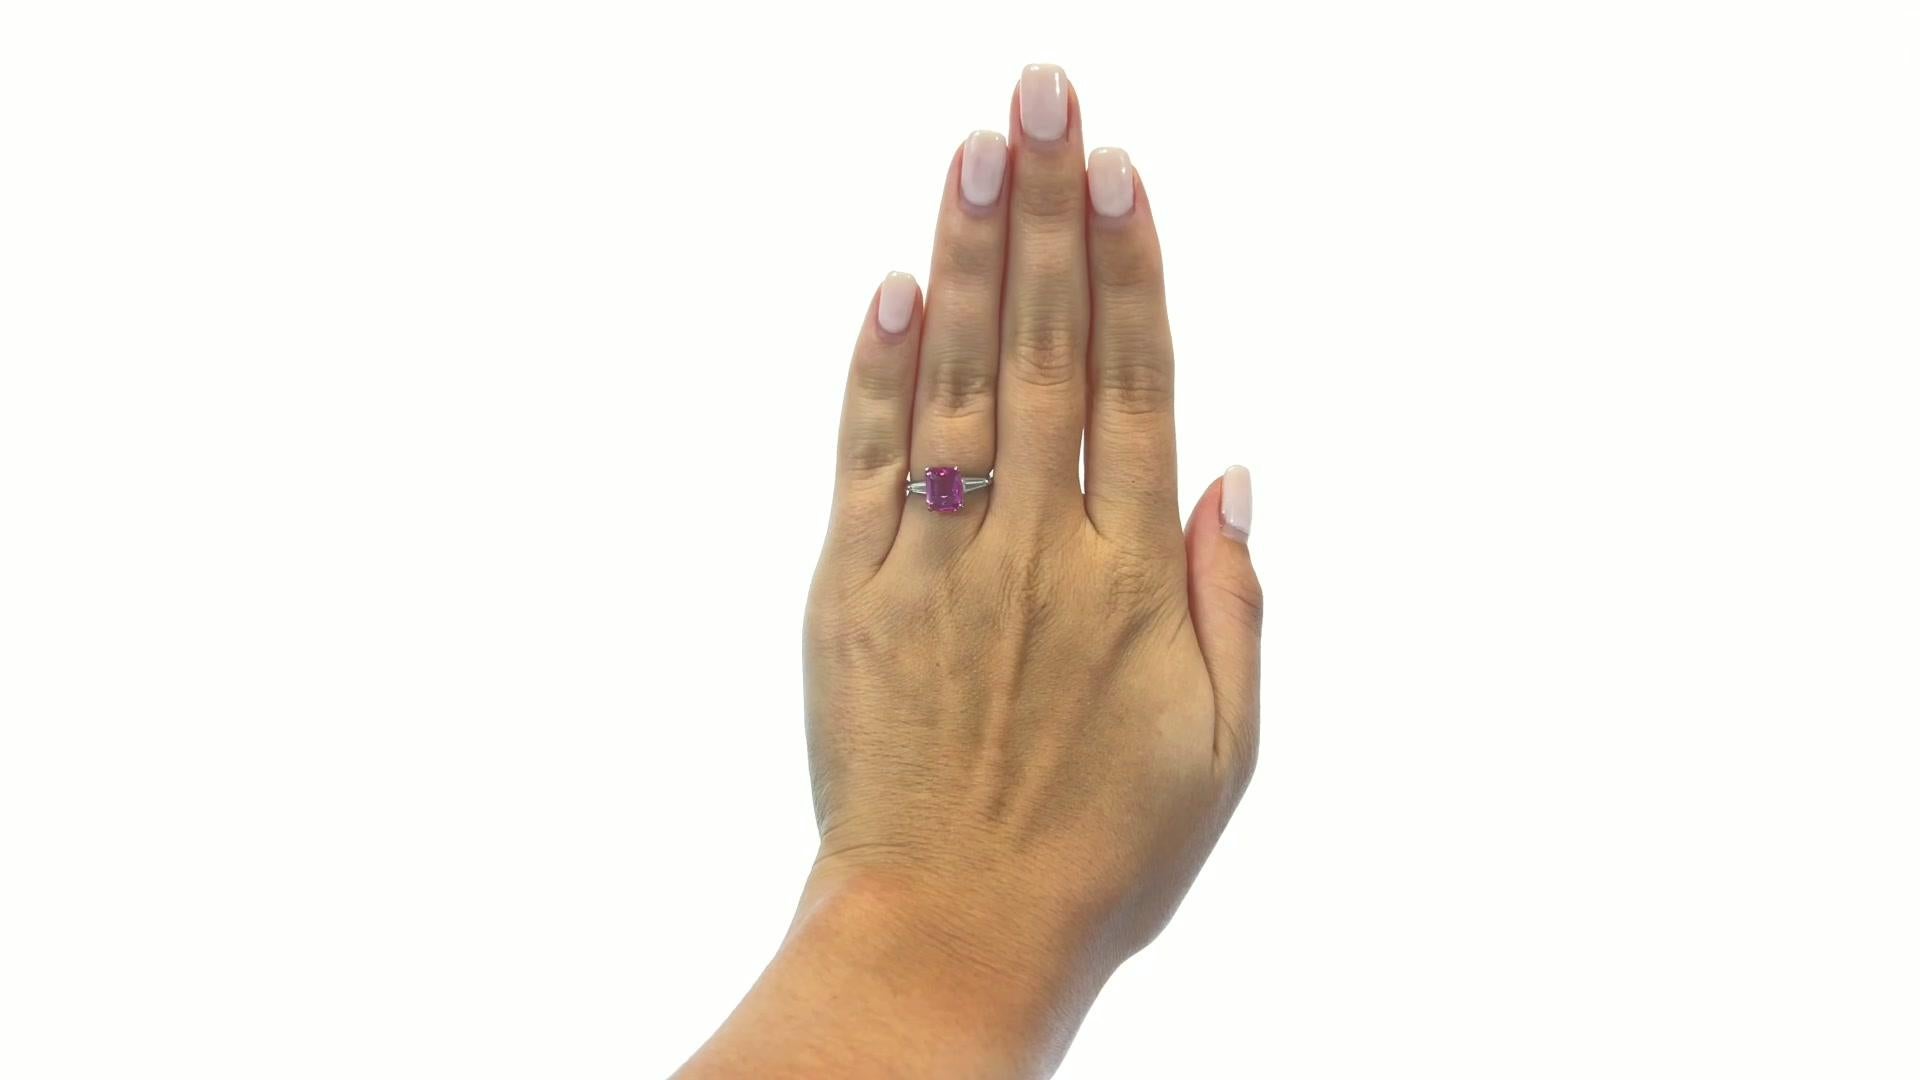 Retro GIA Sapphire Diamond Platinum Ring. Featuring GIA octagon 2.11 carat Purple-Pink sapphire (#5212010858). Accented by 2 tapered baguettes approximately 0.20 carat total, G color, VS clarity. Signed Gleim. Circa 1950s. Size 3 3/4 and may be